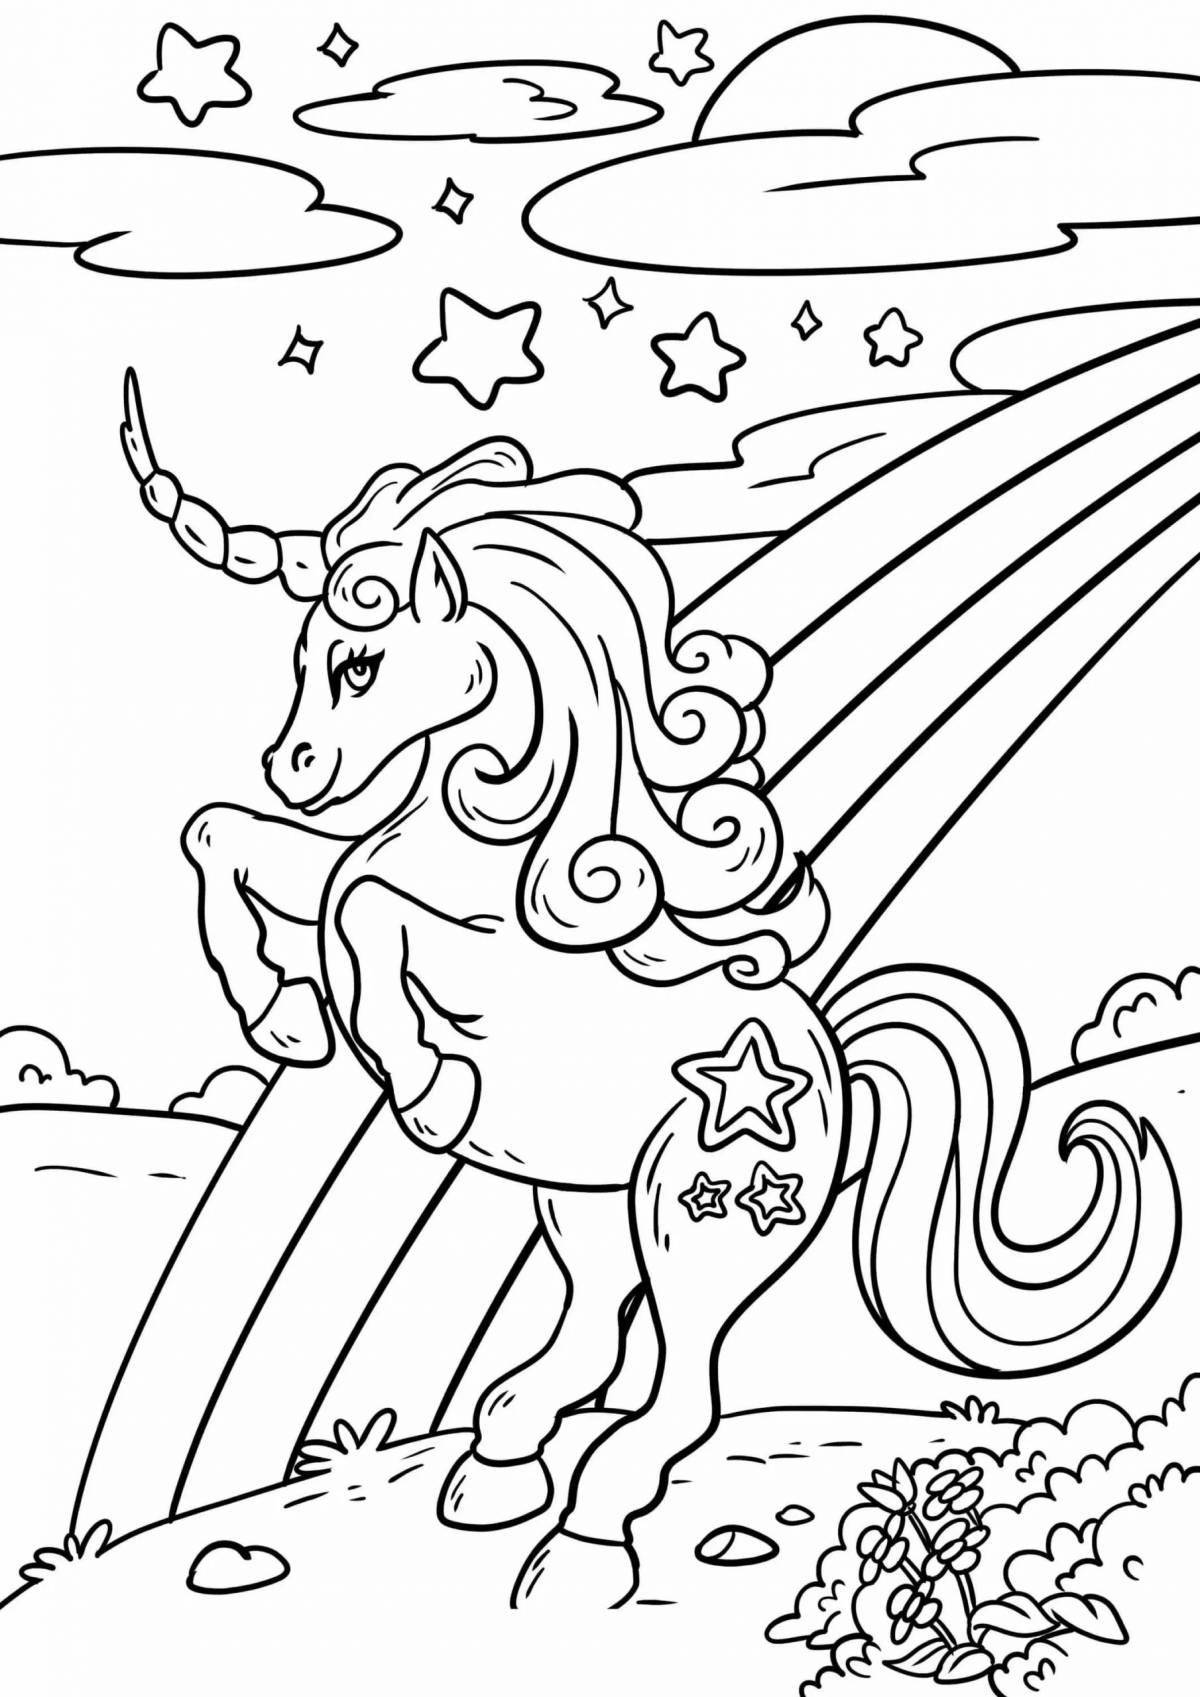 Great unicorn coloring page